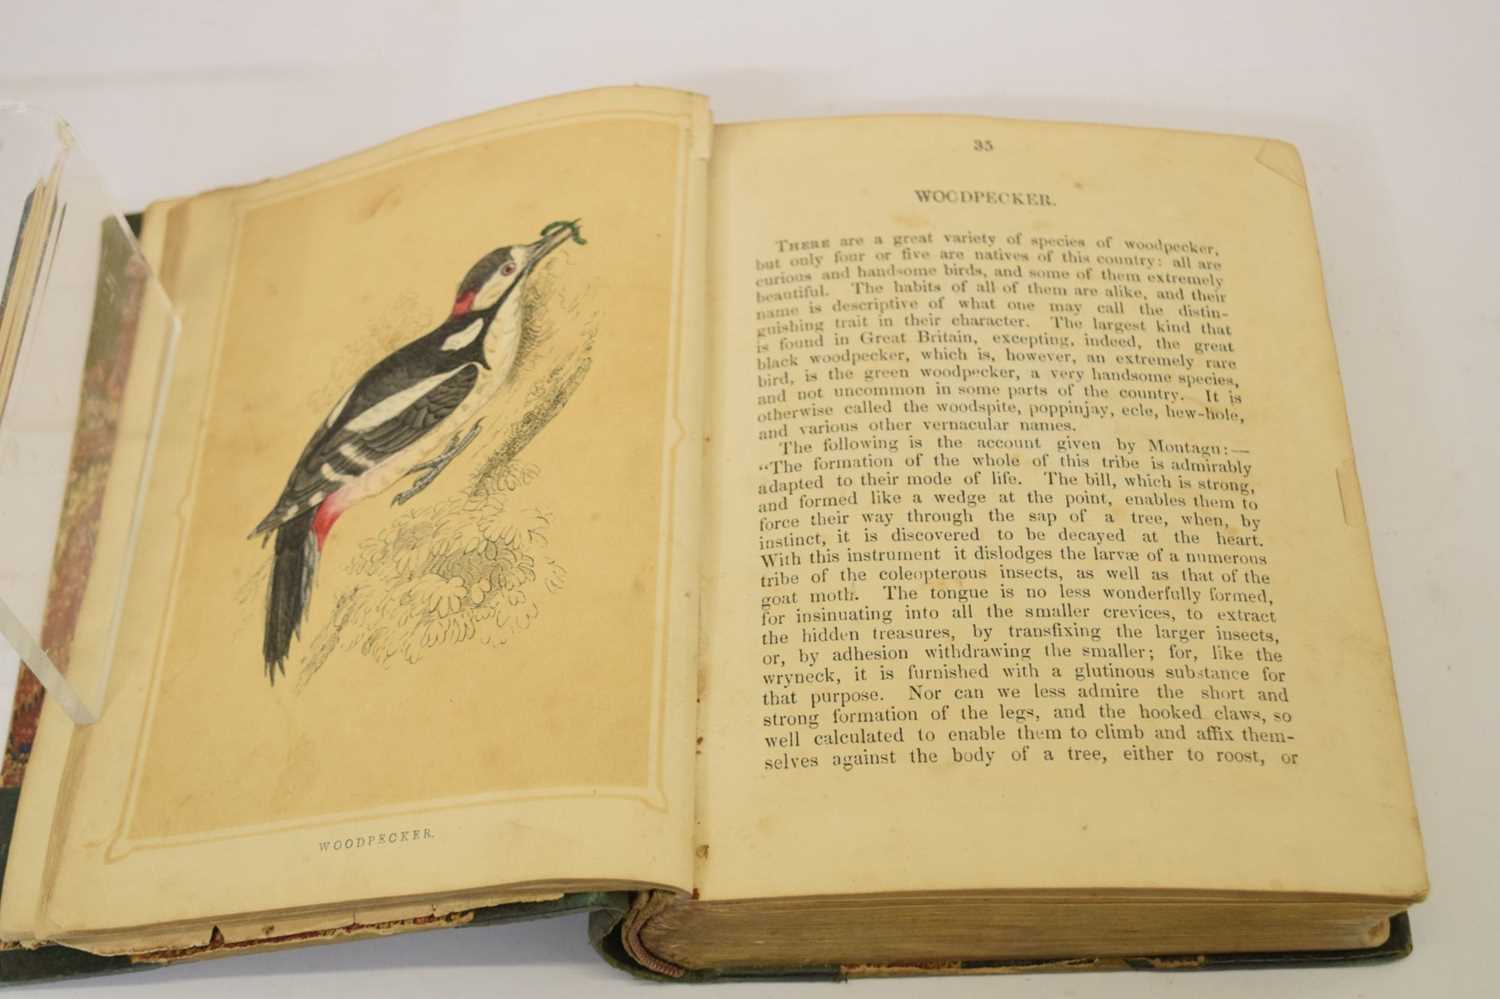 Rev F. O. Morris, B.A., 'Book of Natural History' - First edition 1852 - Image 3 of 7